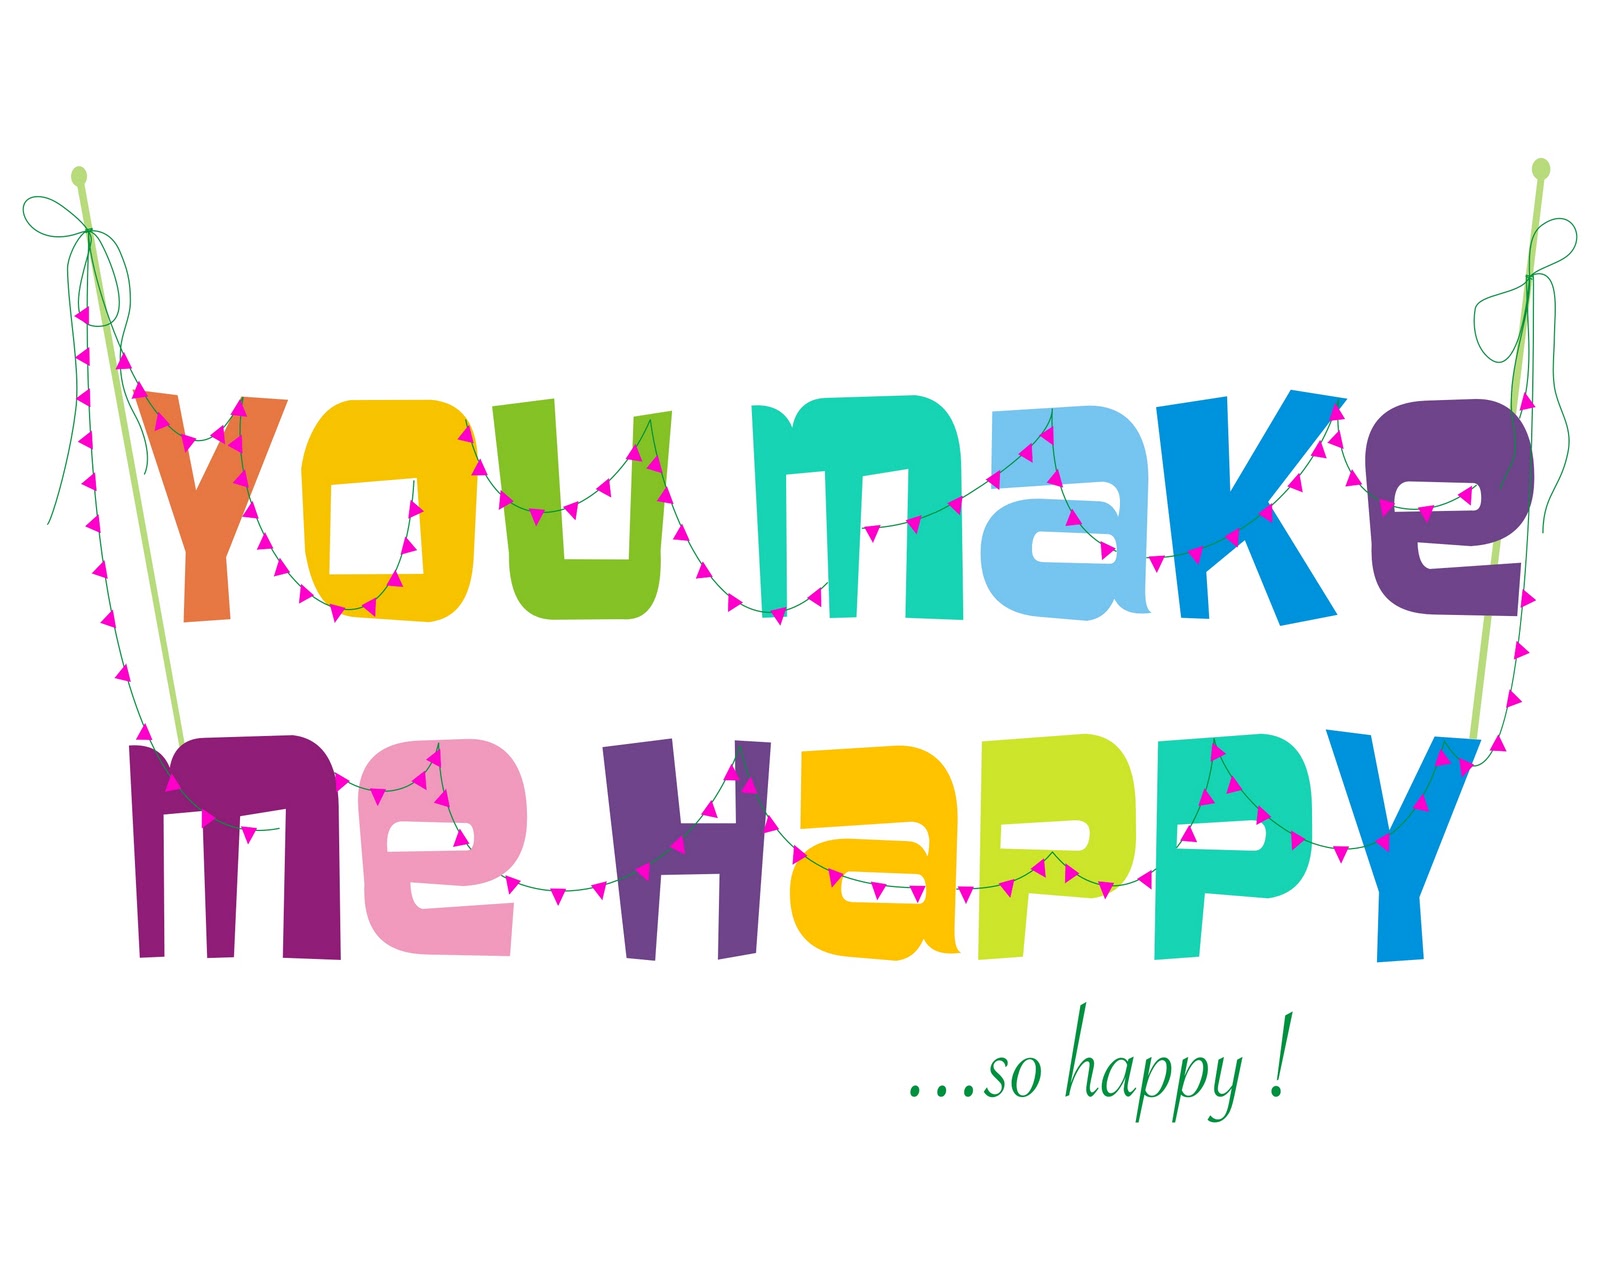 Nice is and happy. You make me Happy. Картину в i am Happy. I am Happy картинки. You make me Happy картинки.